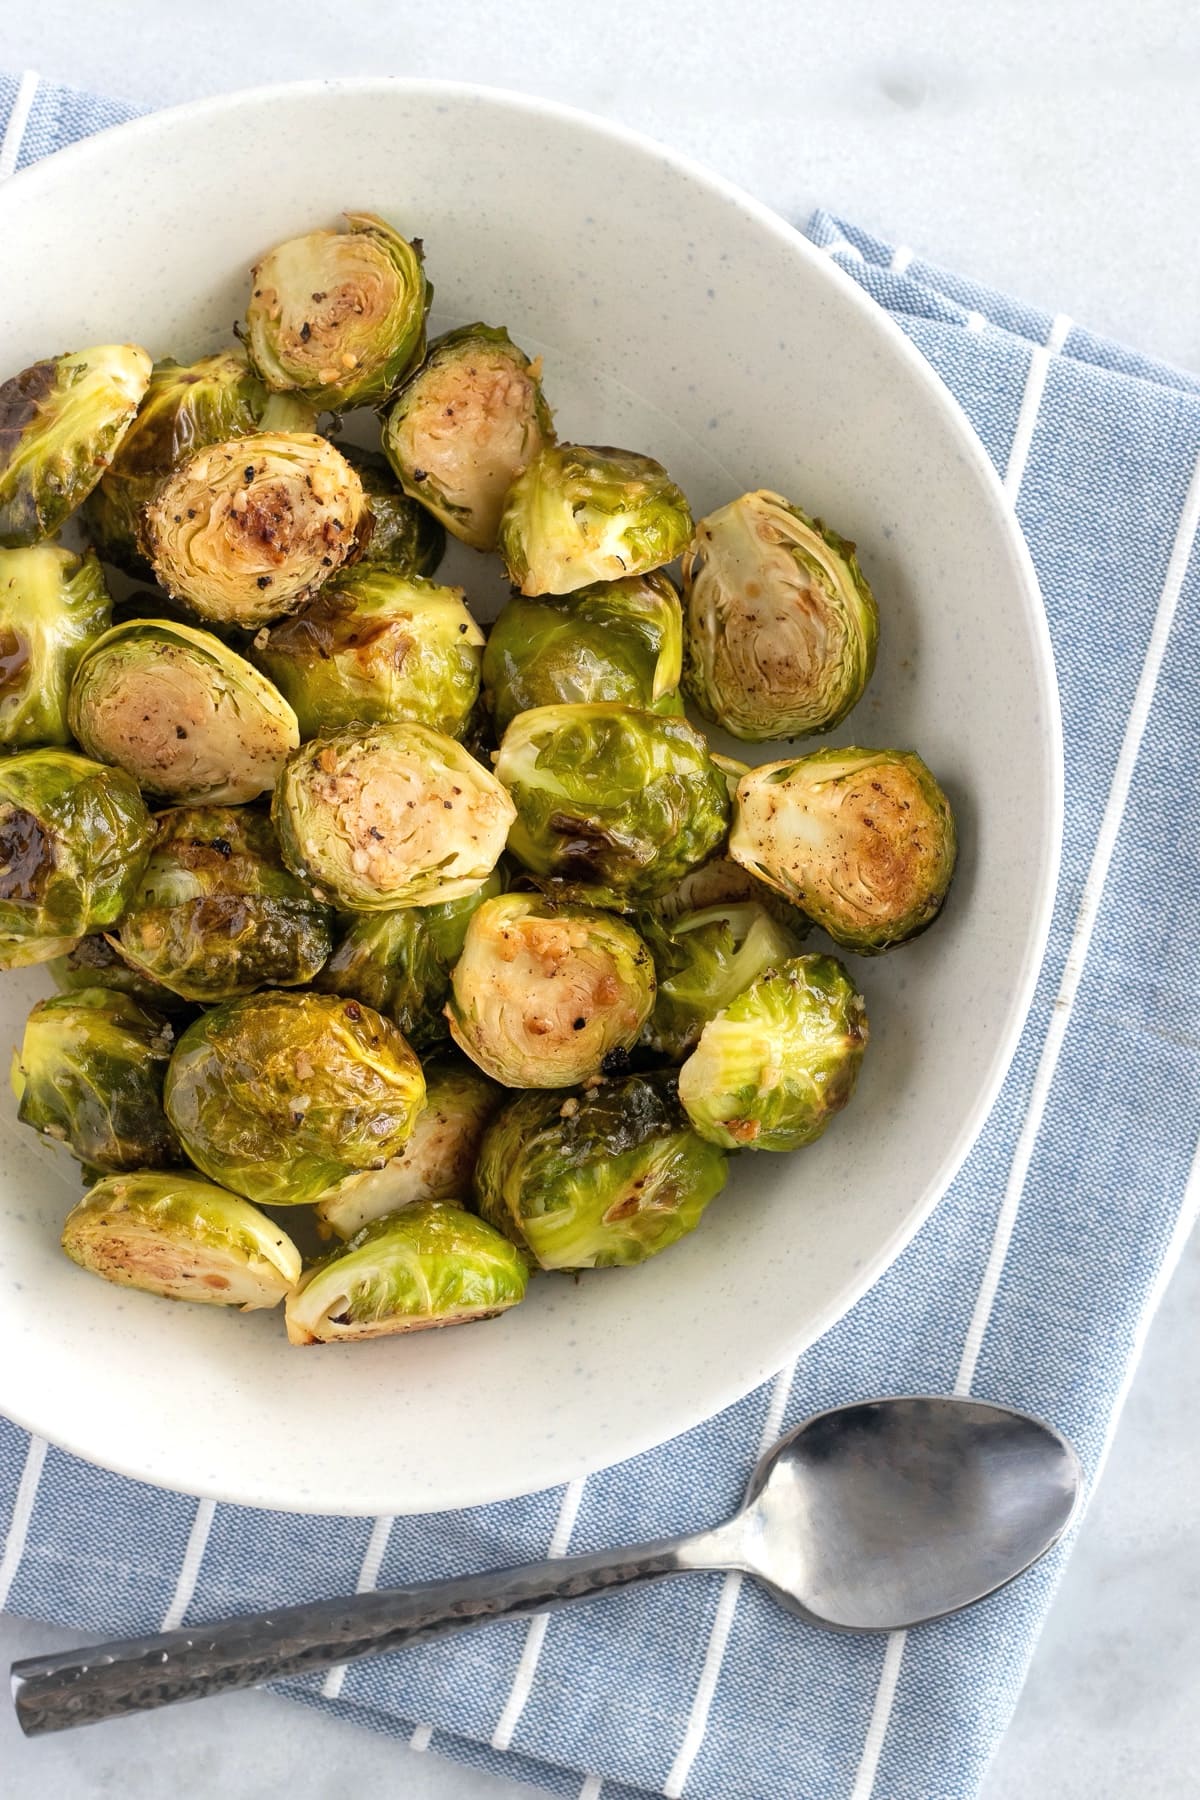 How to make garlic butter roasted brussels sprouts